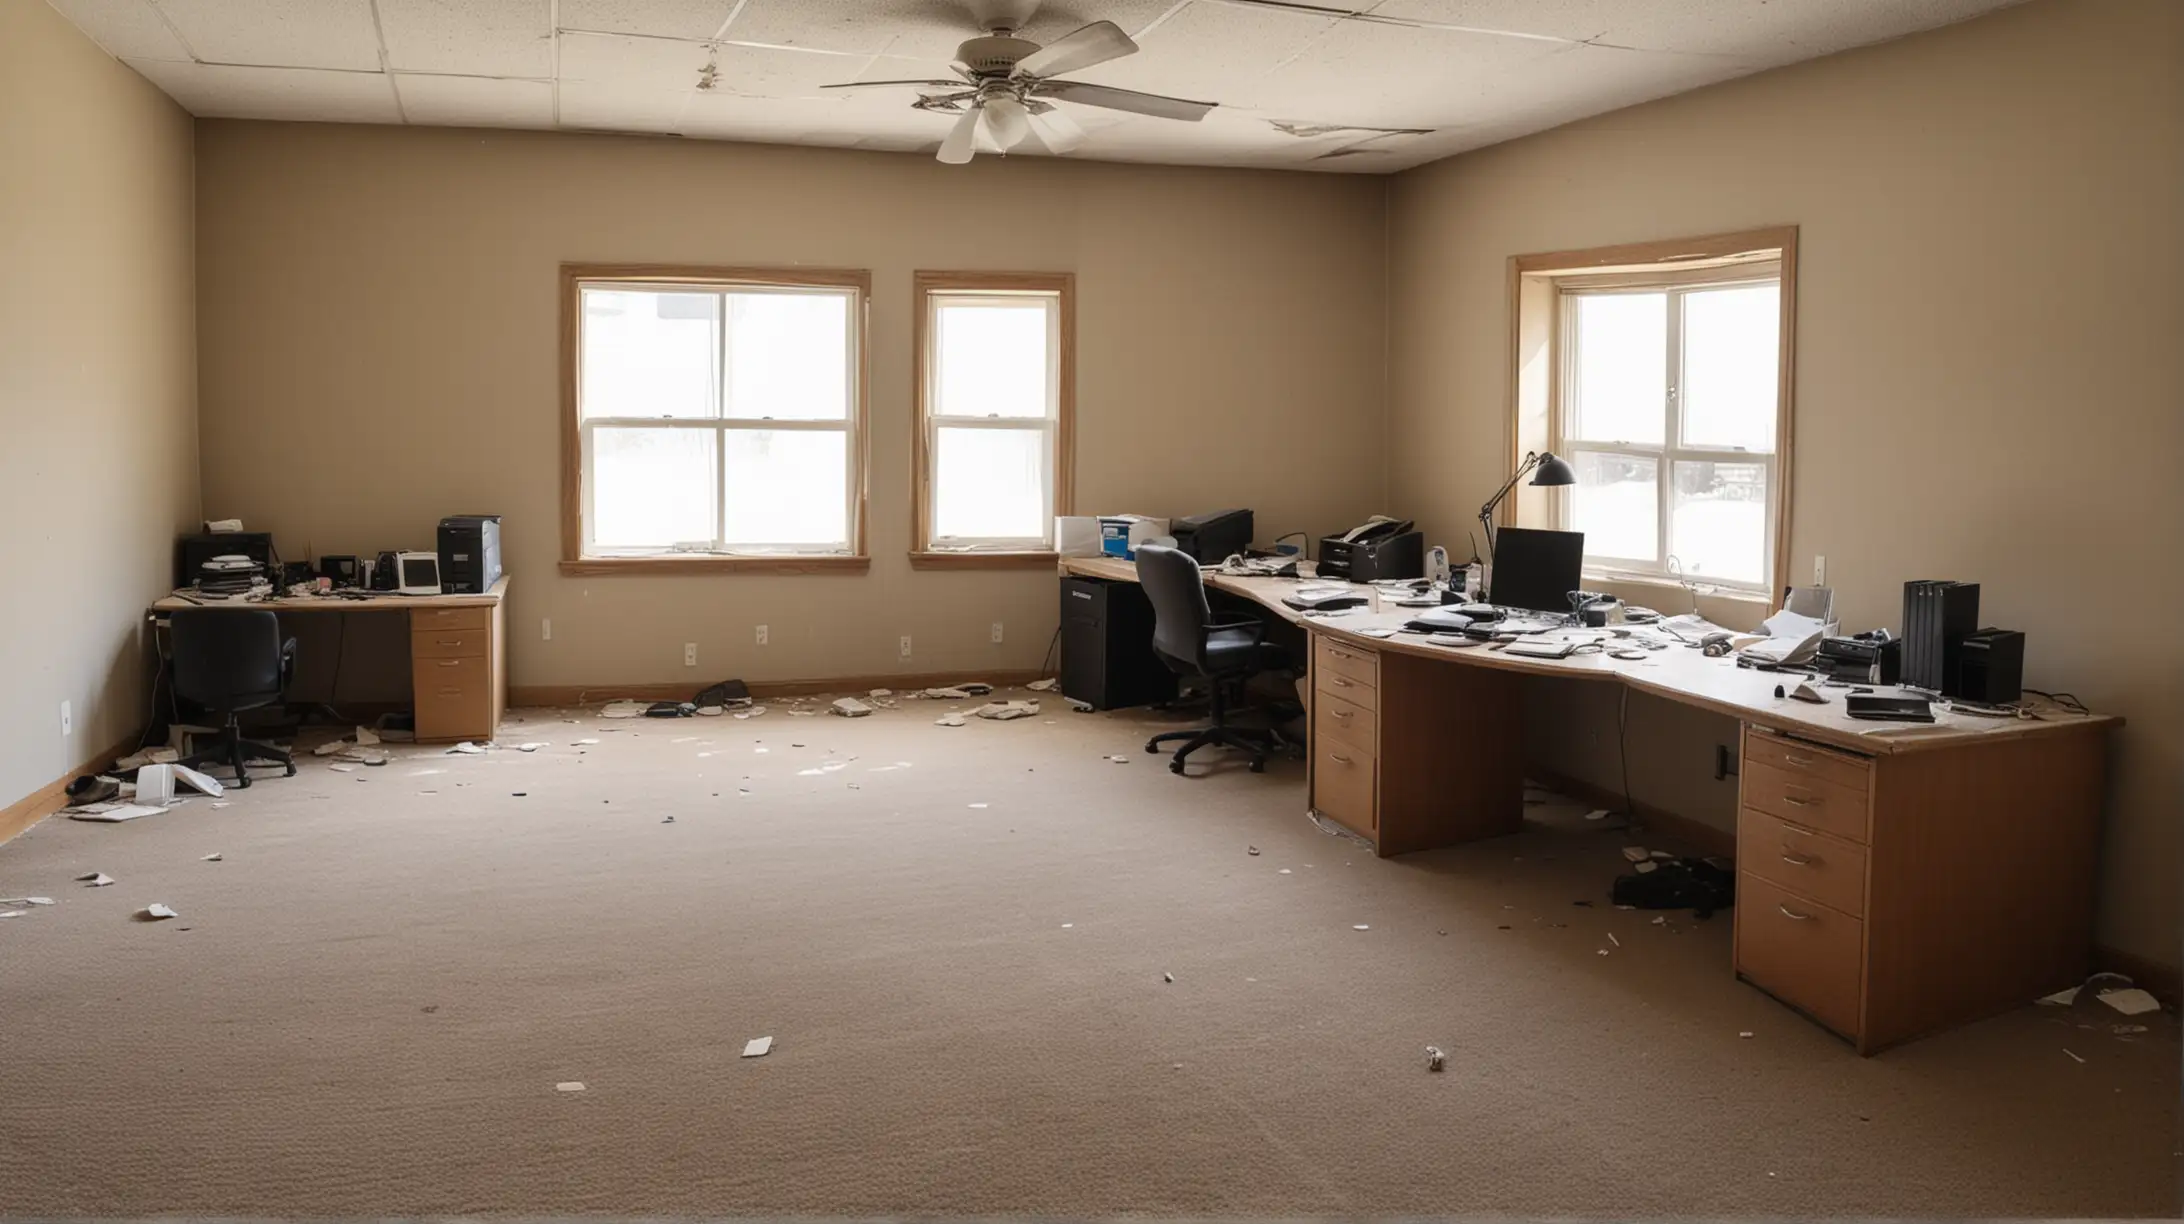 Transformation of a Dusty Office Room Before and After Cleaning